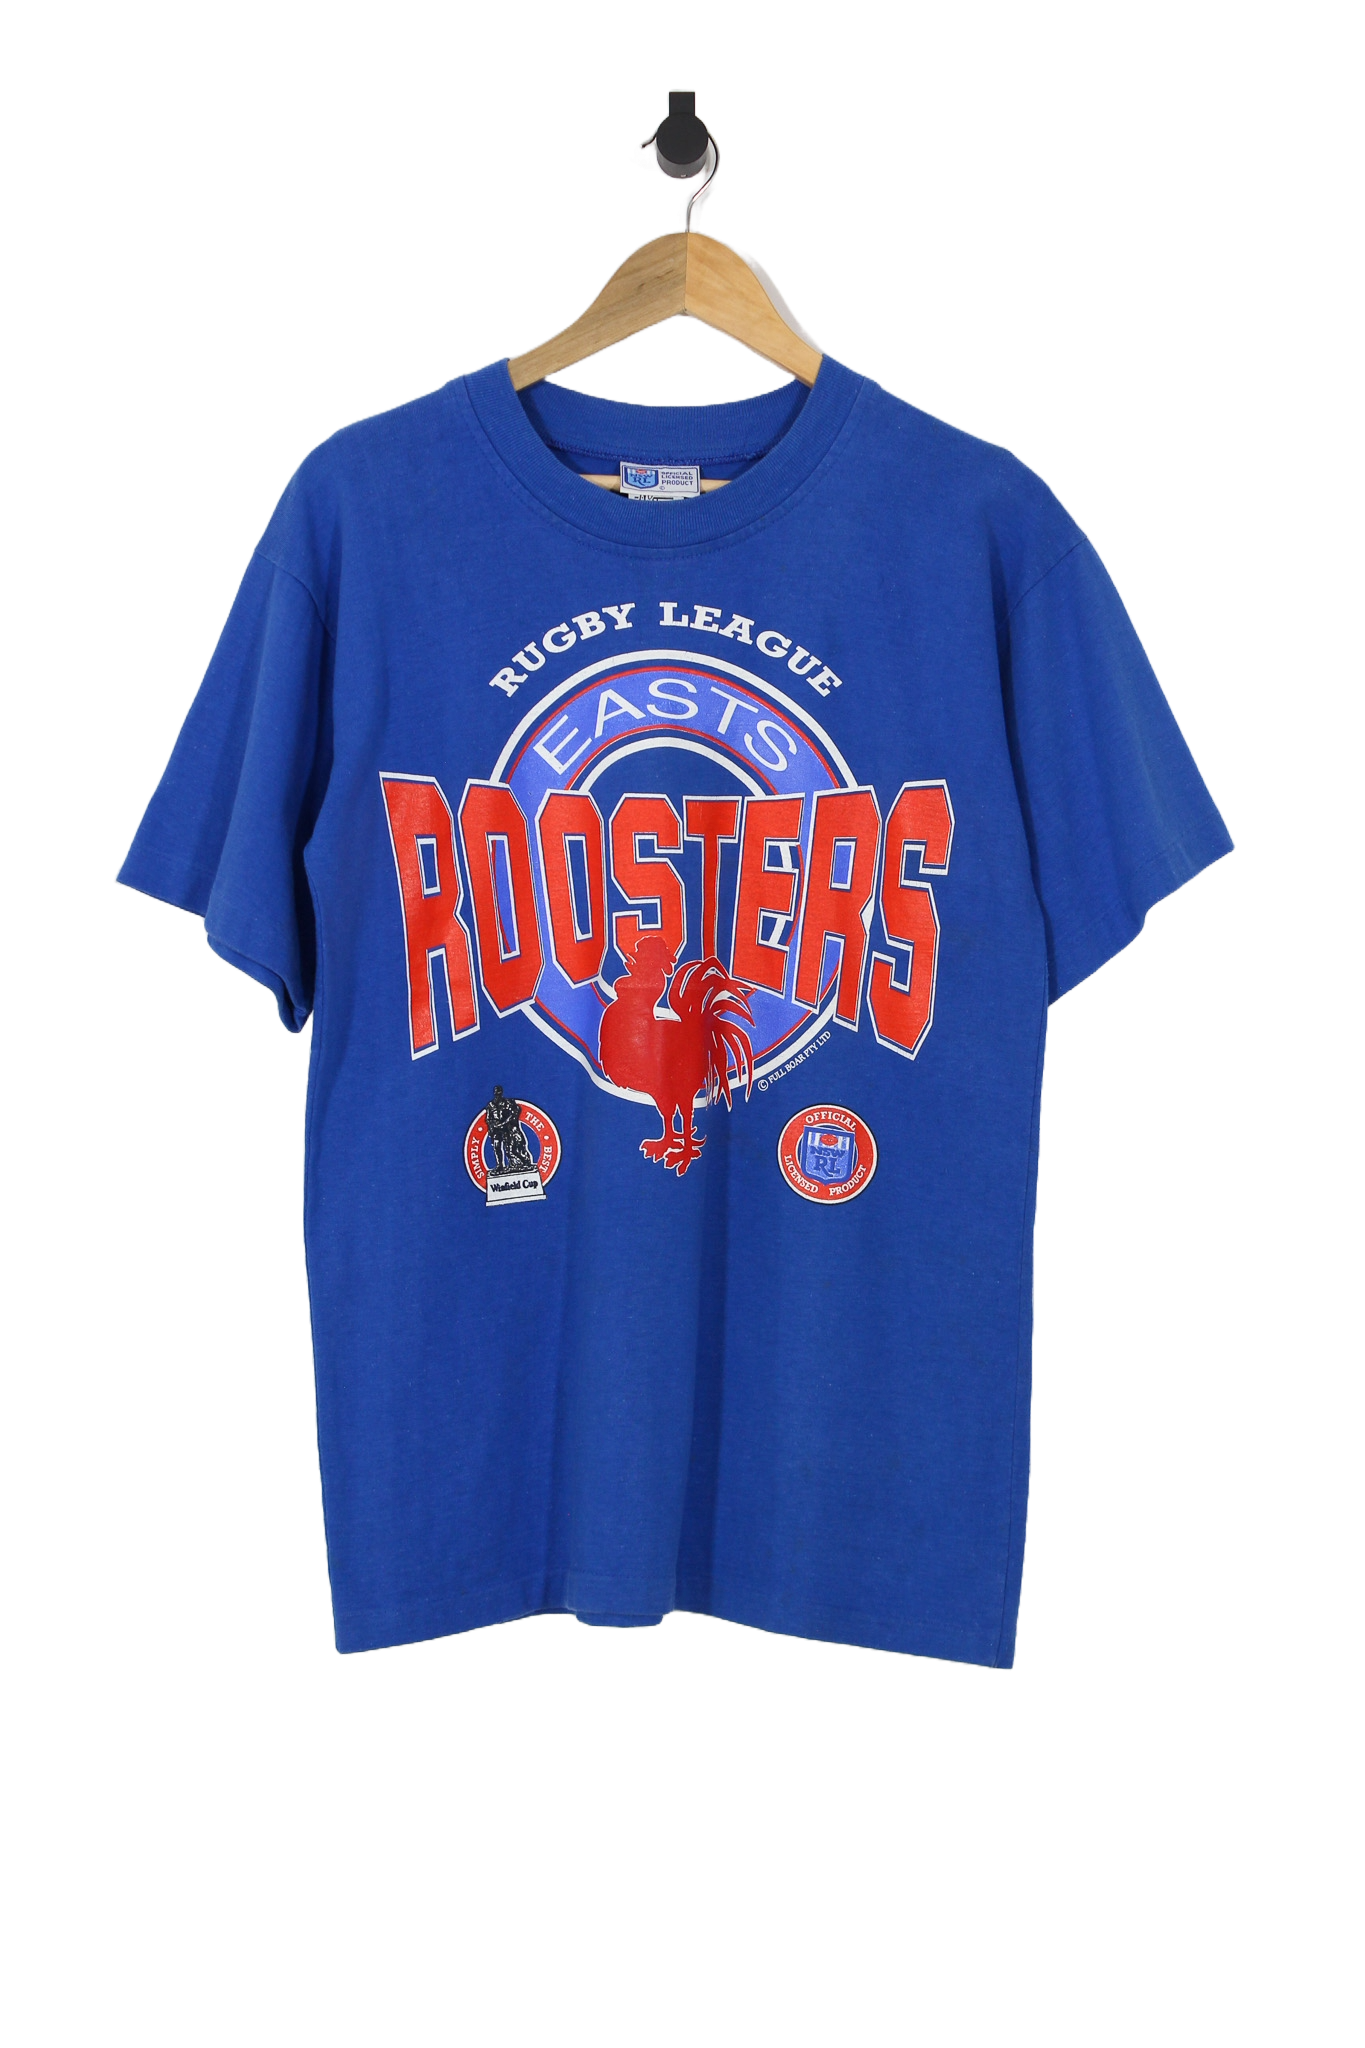 Vintage Sydney Roosters Easts ARL Winfield Cup NRL T-Shirt - M